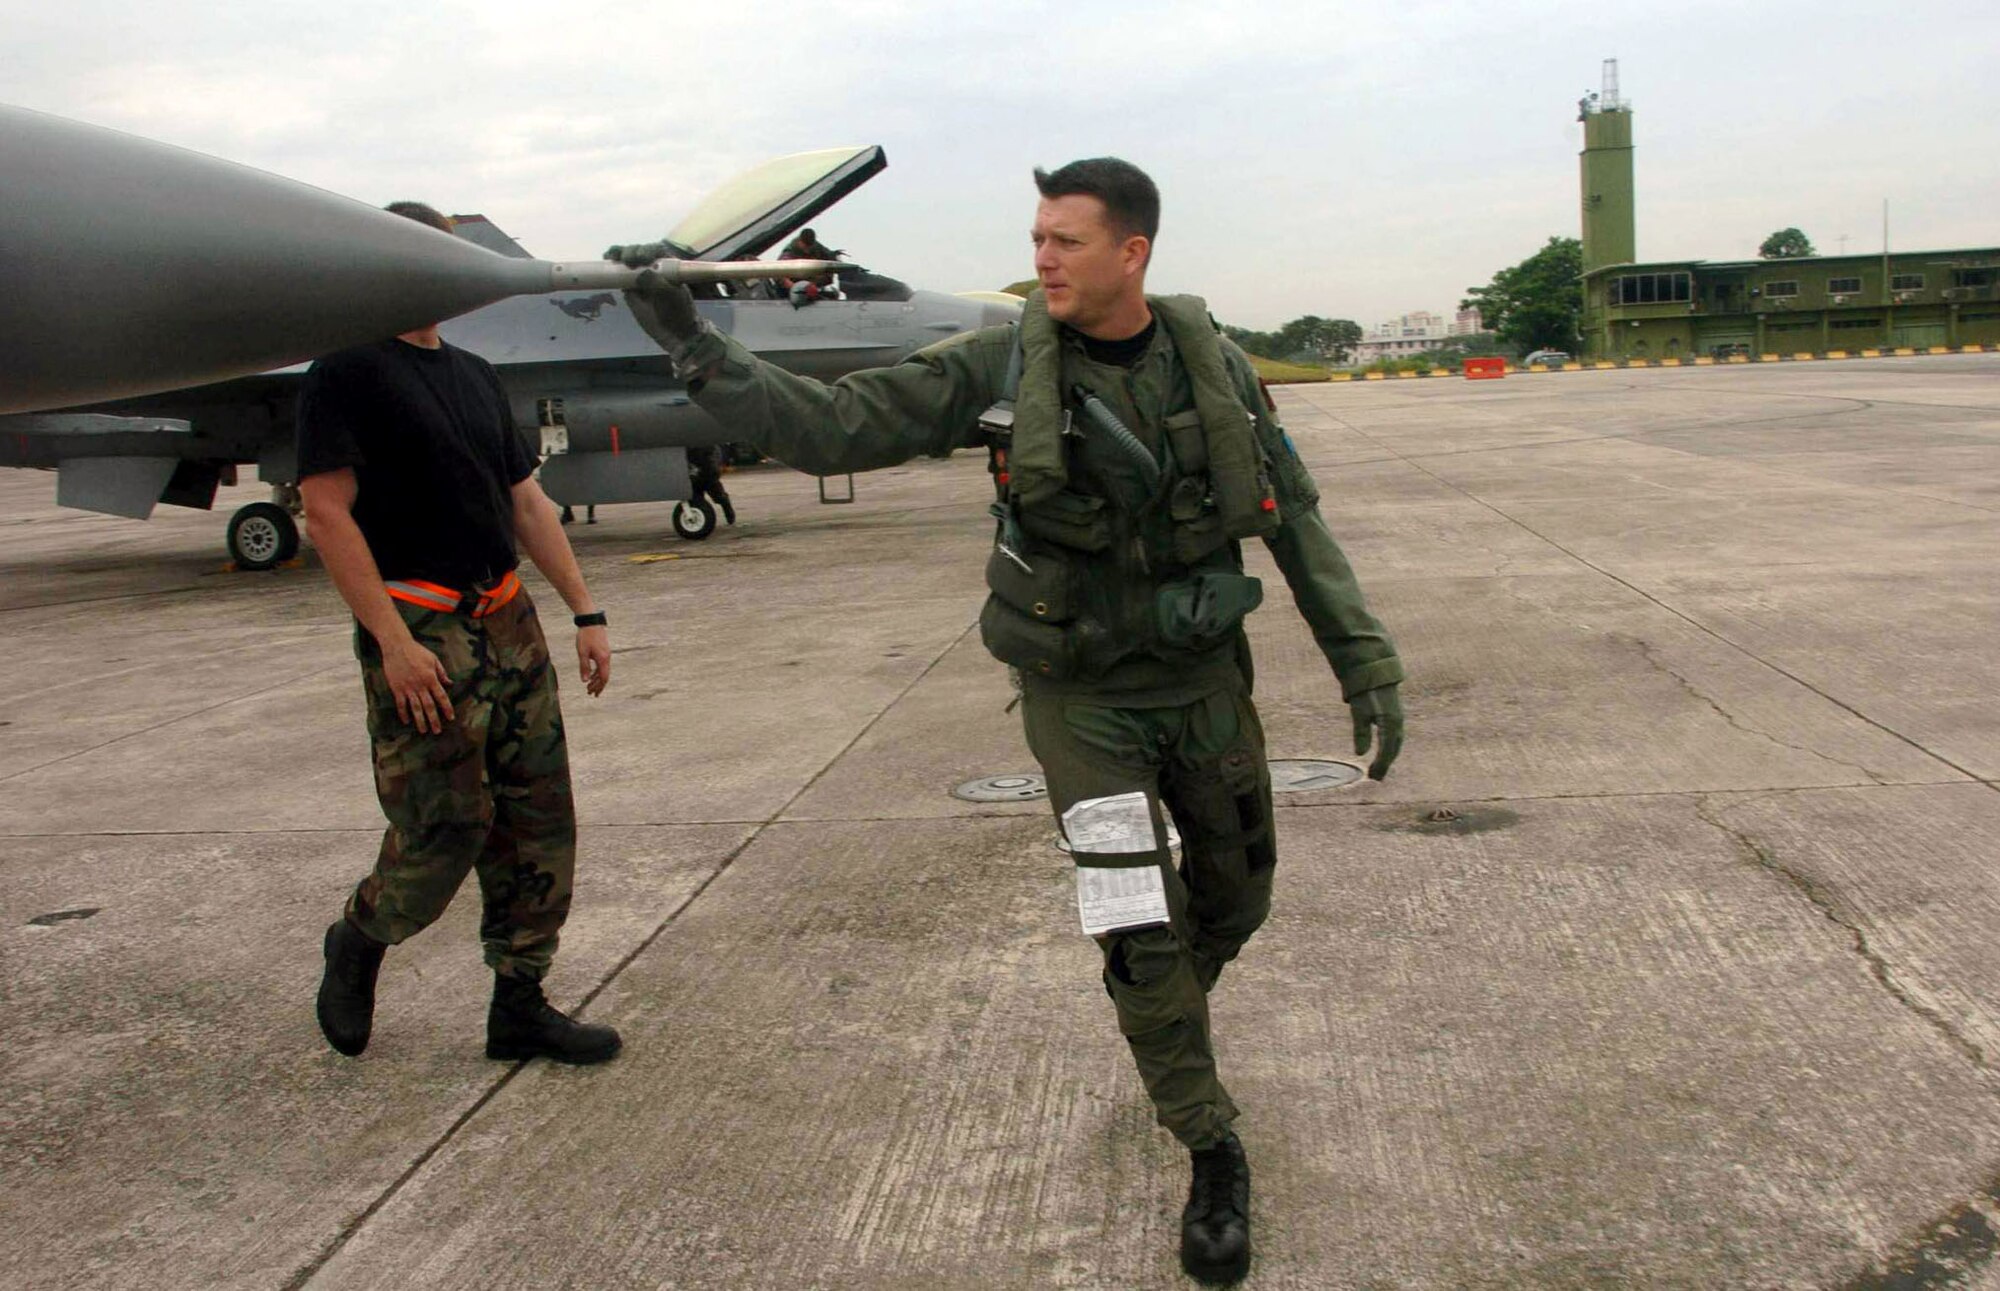 PAYA LEBAR AIR BASE, Singapore -- Maj. Mike Rose inspects his F-16 Fighting Falcon before a mission here during Commando Sling 04-3.  U.S. and Singaporean Airmen trained together using realistic dissimilar aircraft air-to-air combat tactics.  Major Rose is a pilot from the 36th Fighter Squadron at Osan Air Base, South Korea.  (U.S. Air Force photo by Master Sgt. Val Gempis)